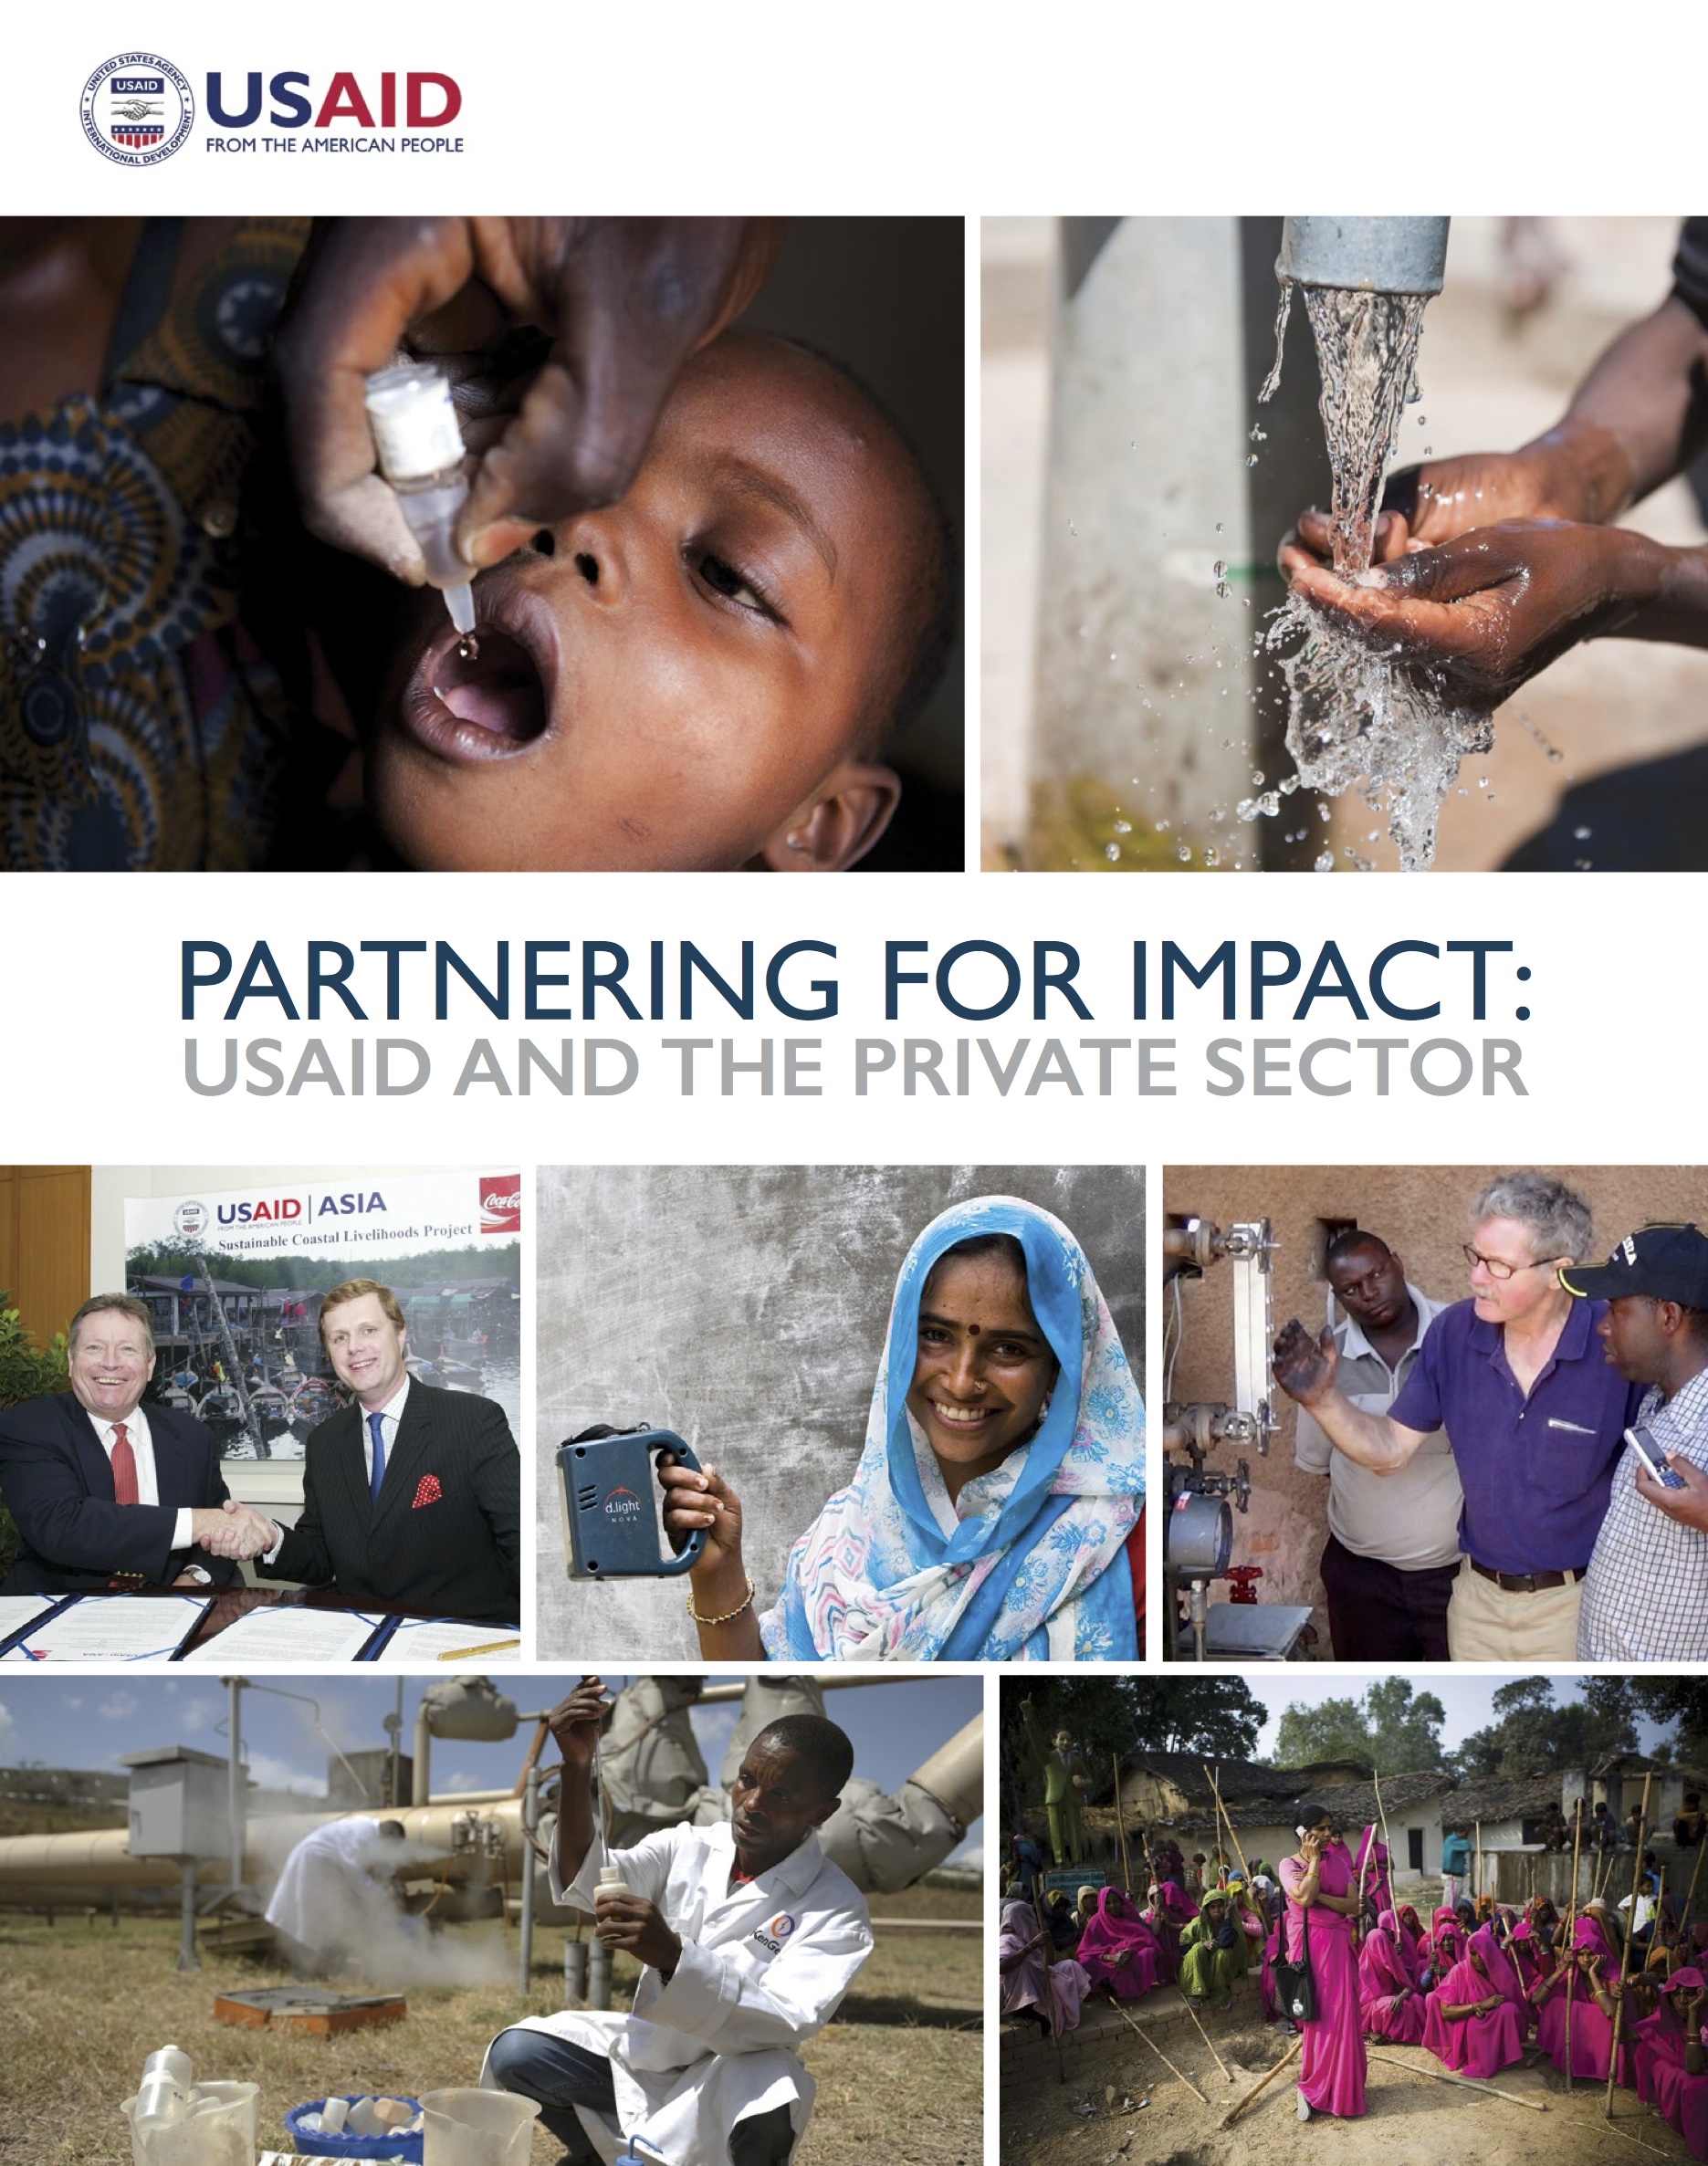 Partnering for Impact Report: USAID and the Private Sector 2017 